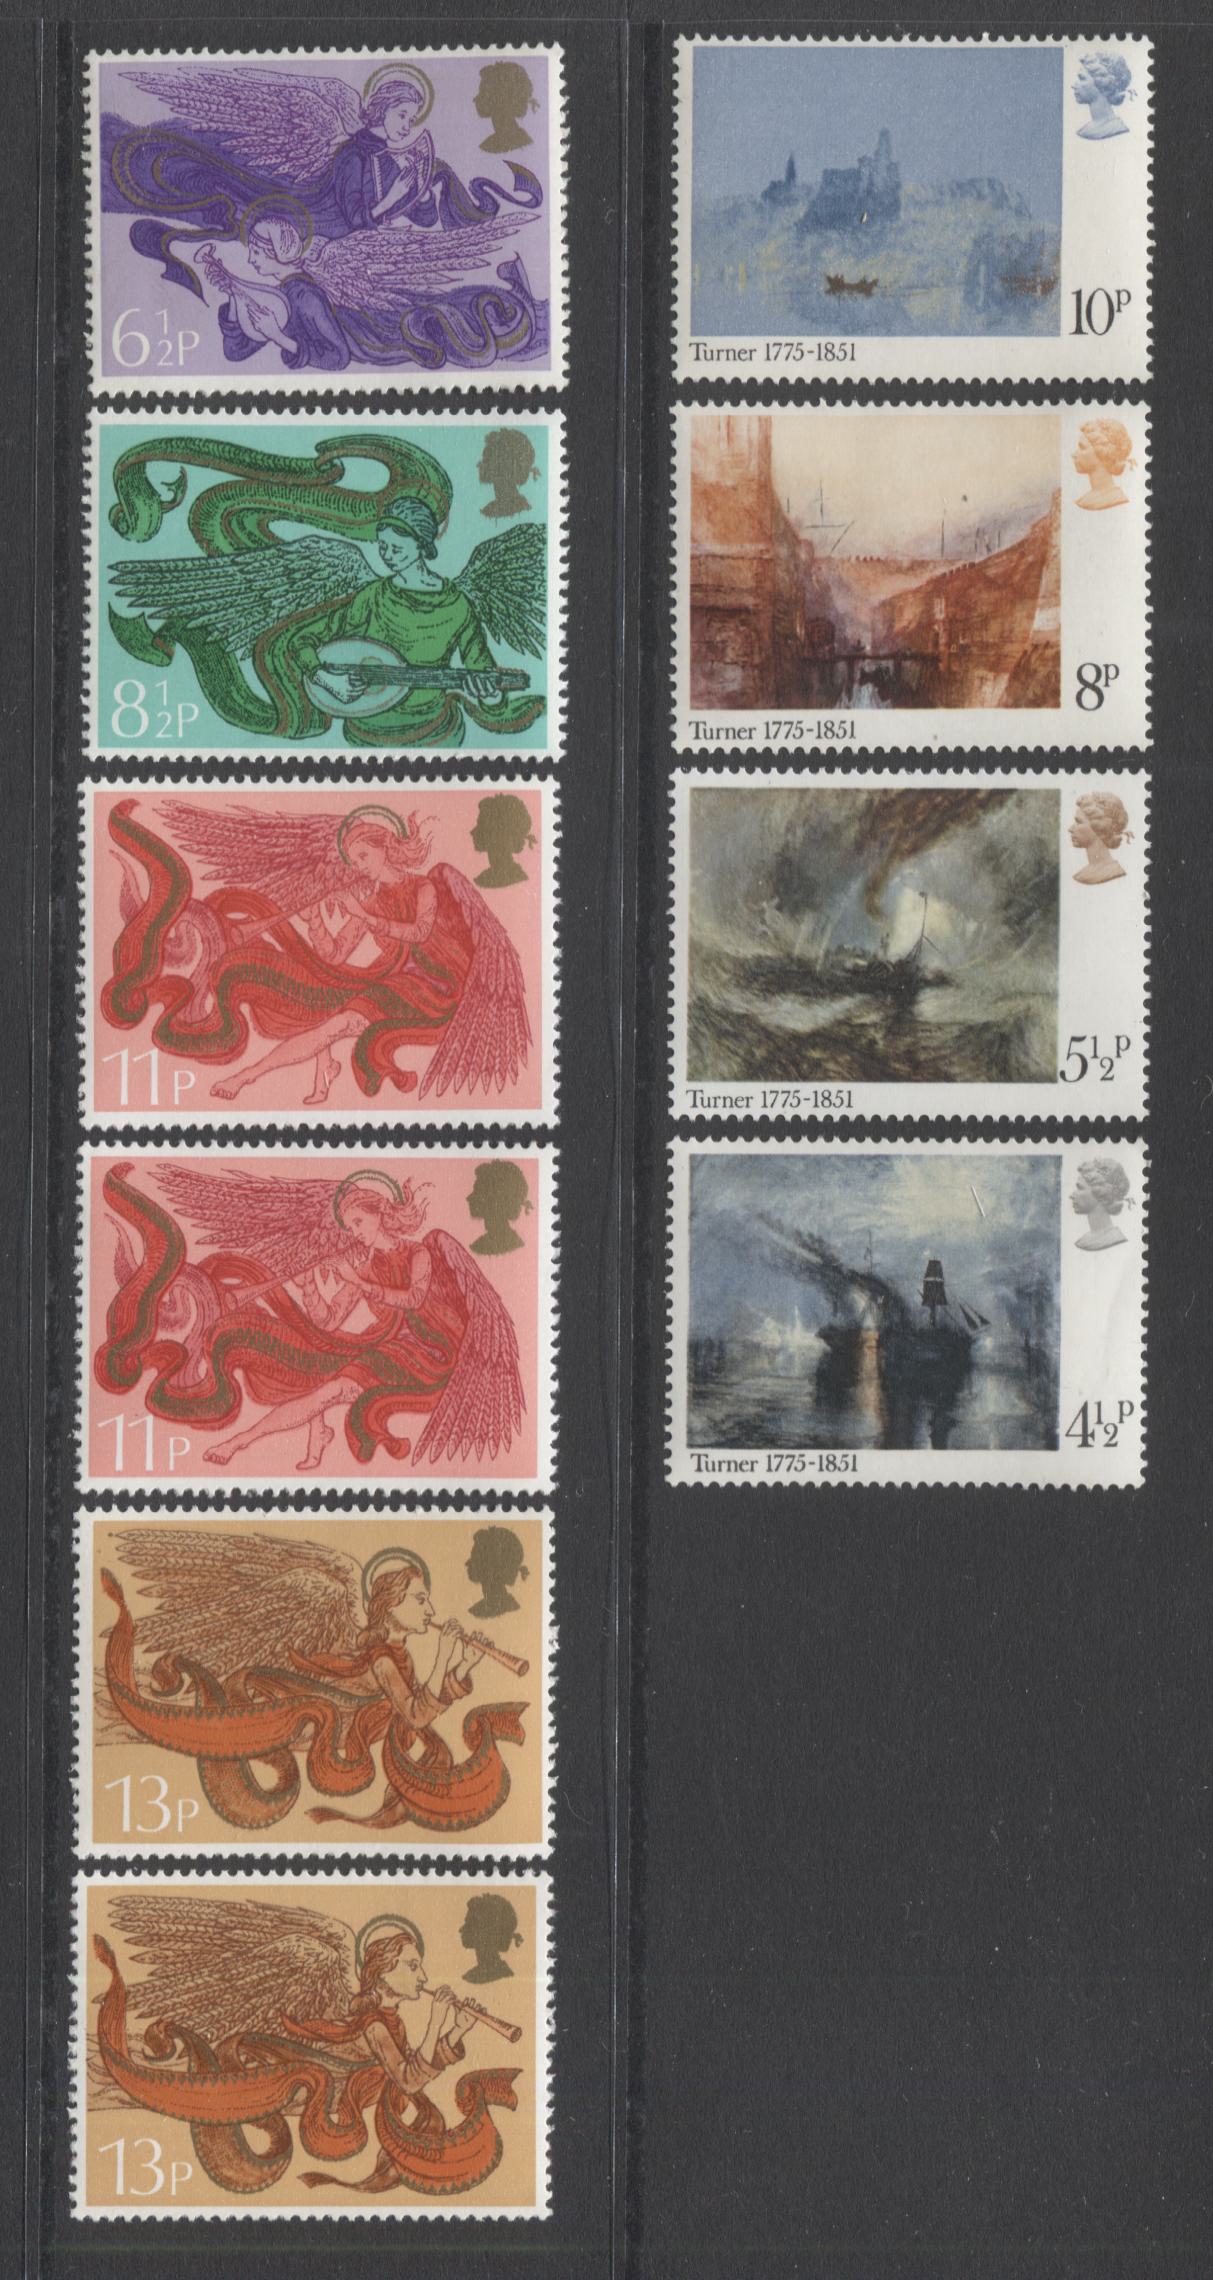 Lot 9 Great Britain SC#736-761, 1975 Commemorative Issues, A Specialized Lot Of 44 VFNH Stamps With Different Paper Varieties. 2006 Scott Cat $16 USD, Click on Listing to See ALL Pictures